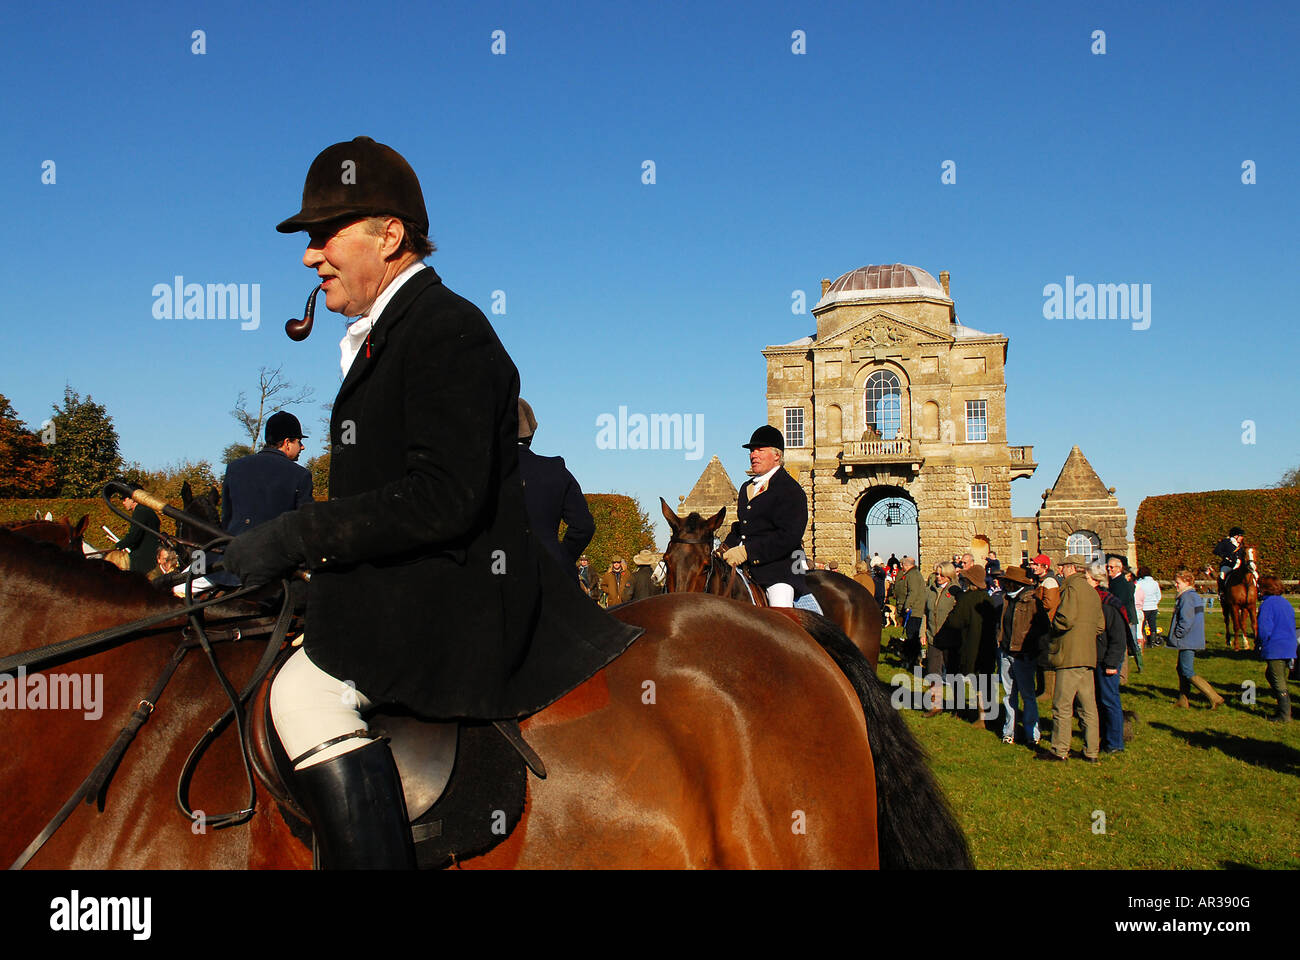 beaufort hunt opening meet of the year 2006 at worcester lodge didmarton Stock Photo